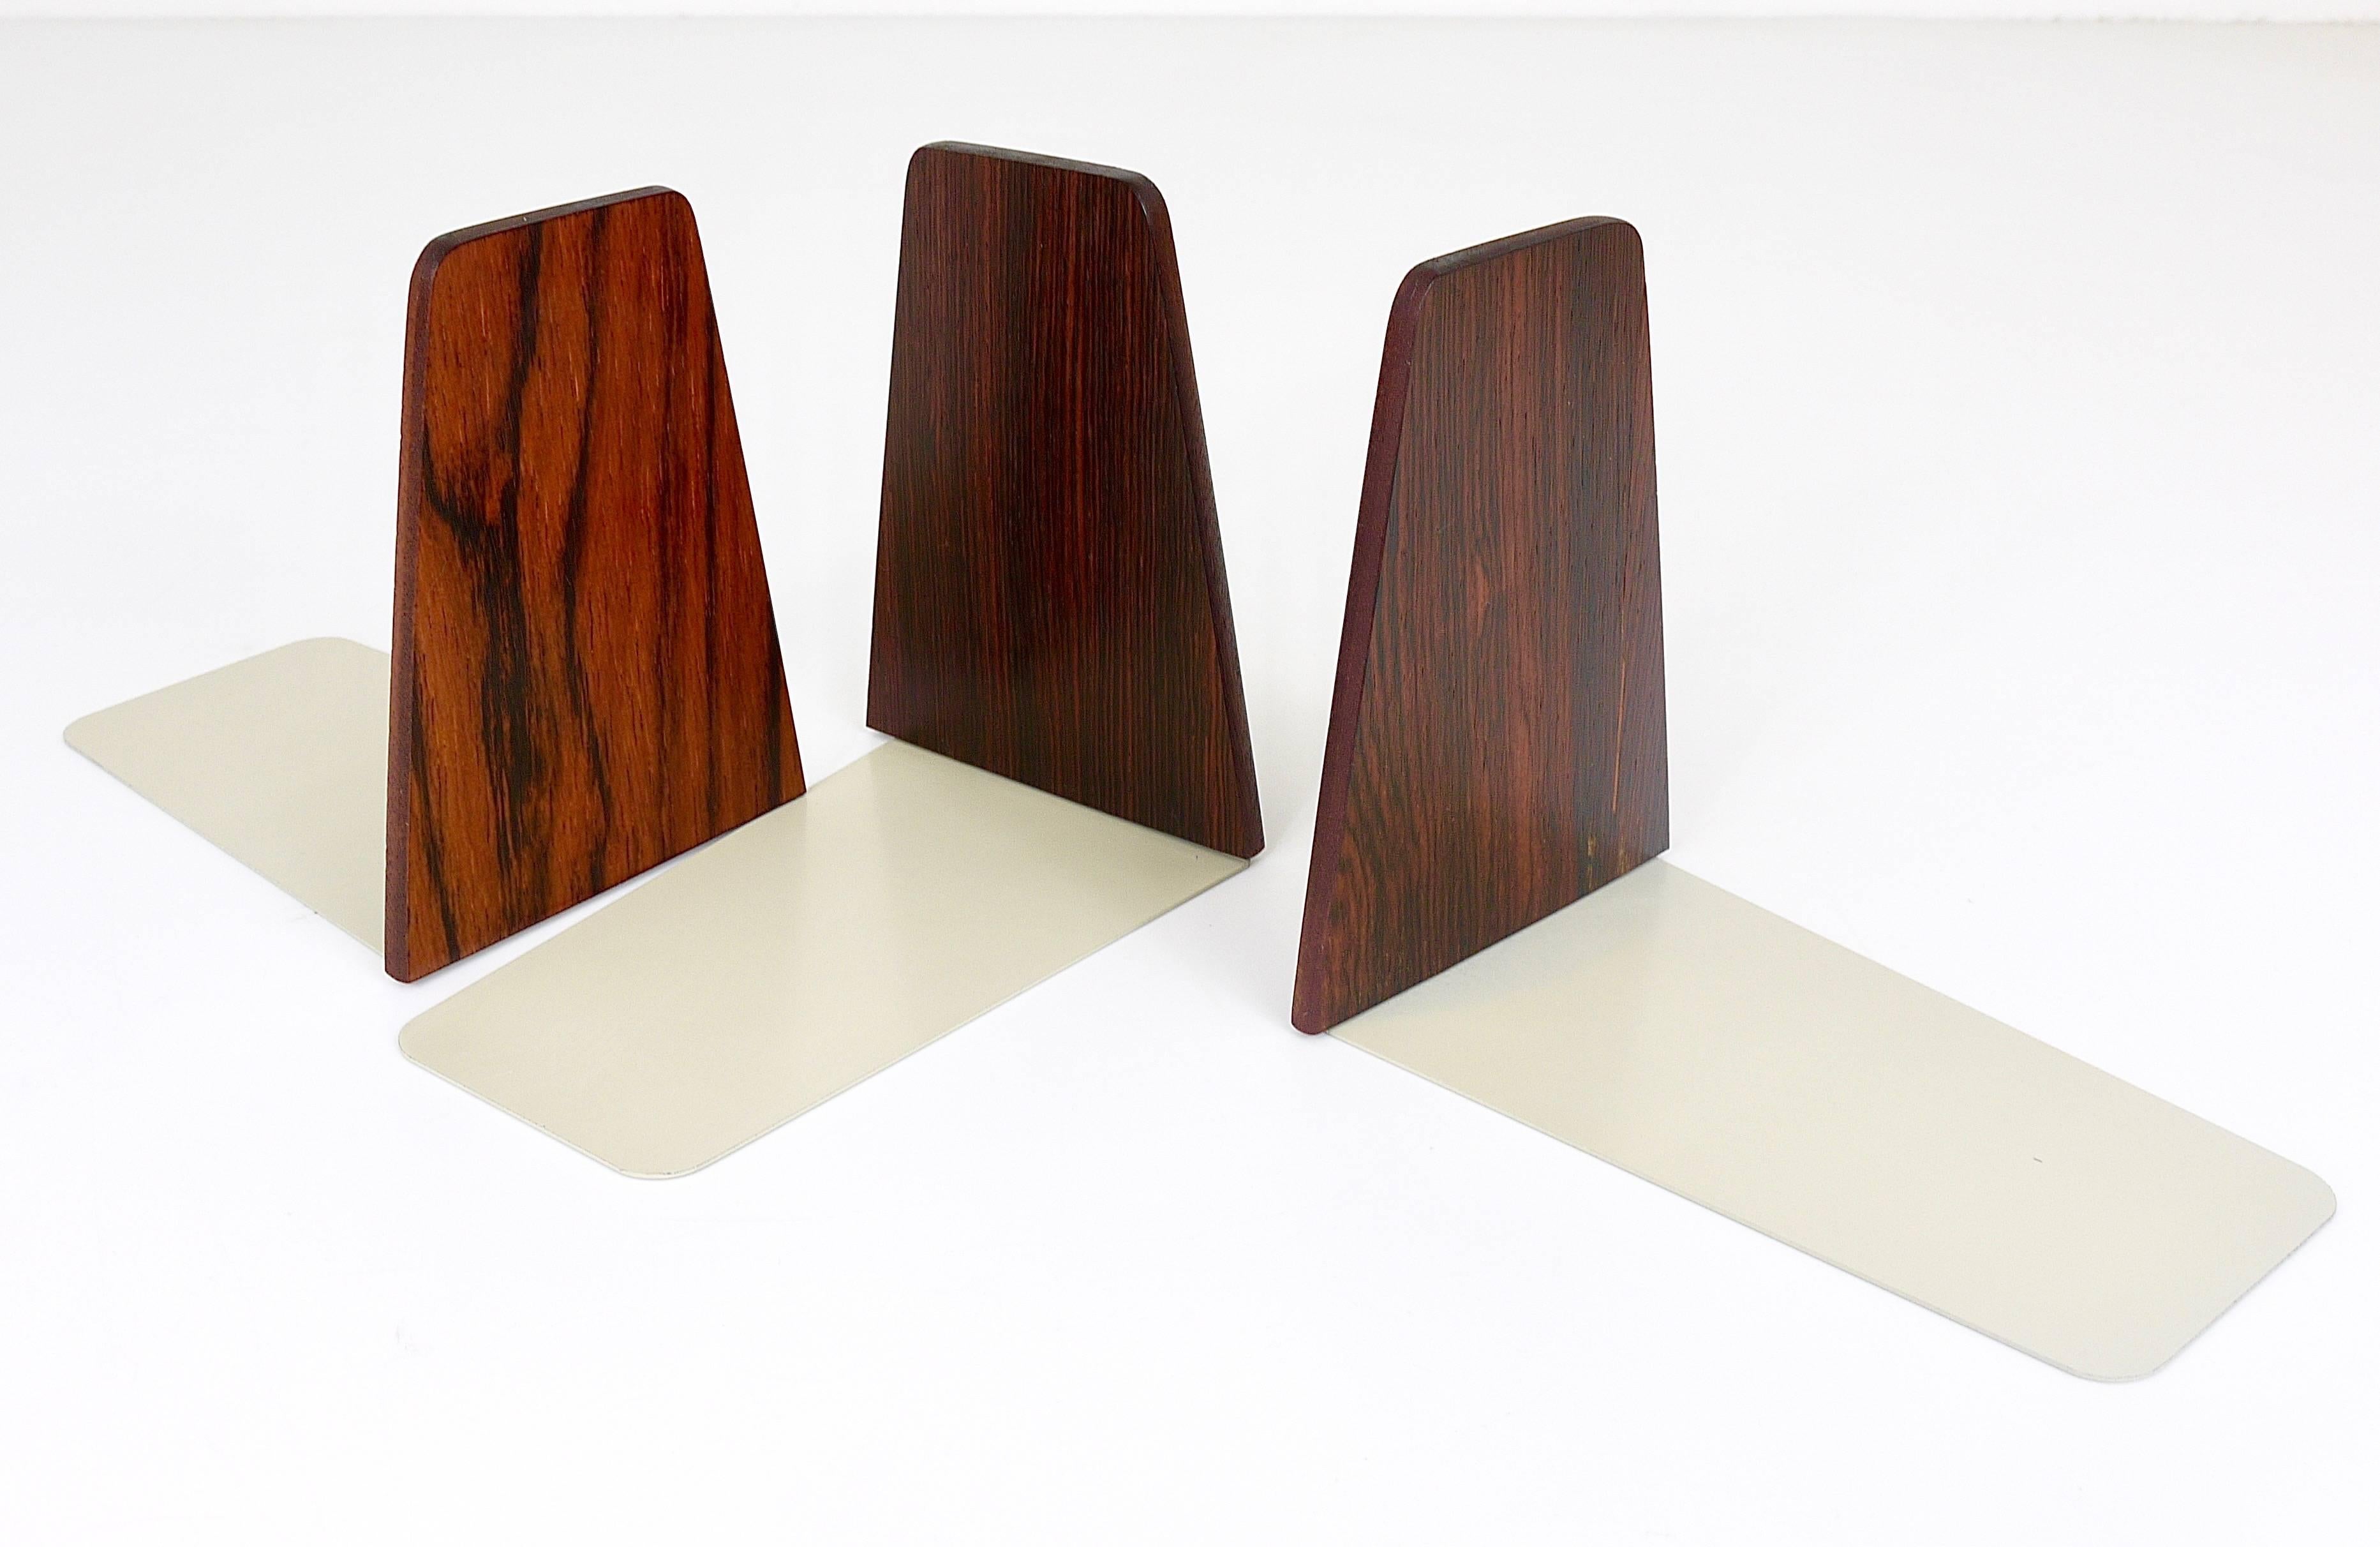 A set of three beautiful mid-century bookends, made of rosewood with grey lacquered metal bases in very good condition. We offer another set of two nearly identical book ends in our other listings.